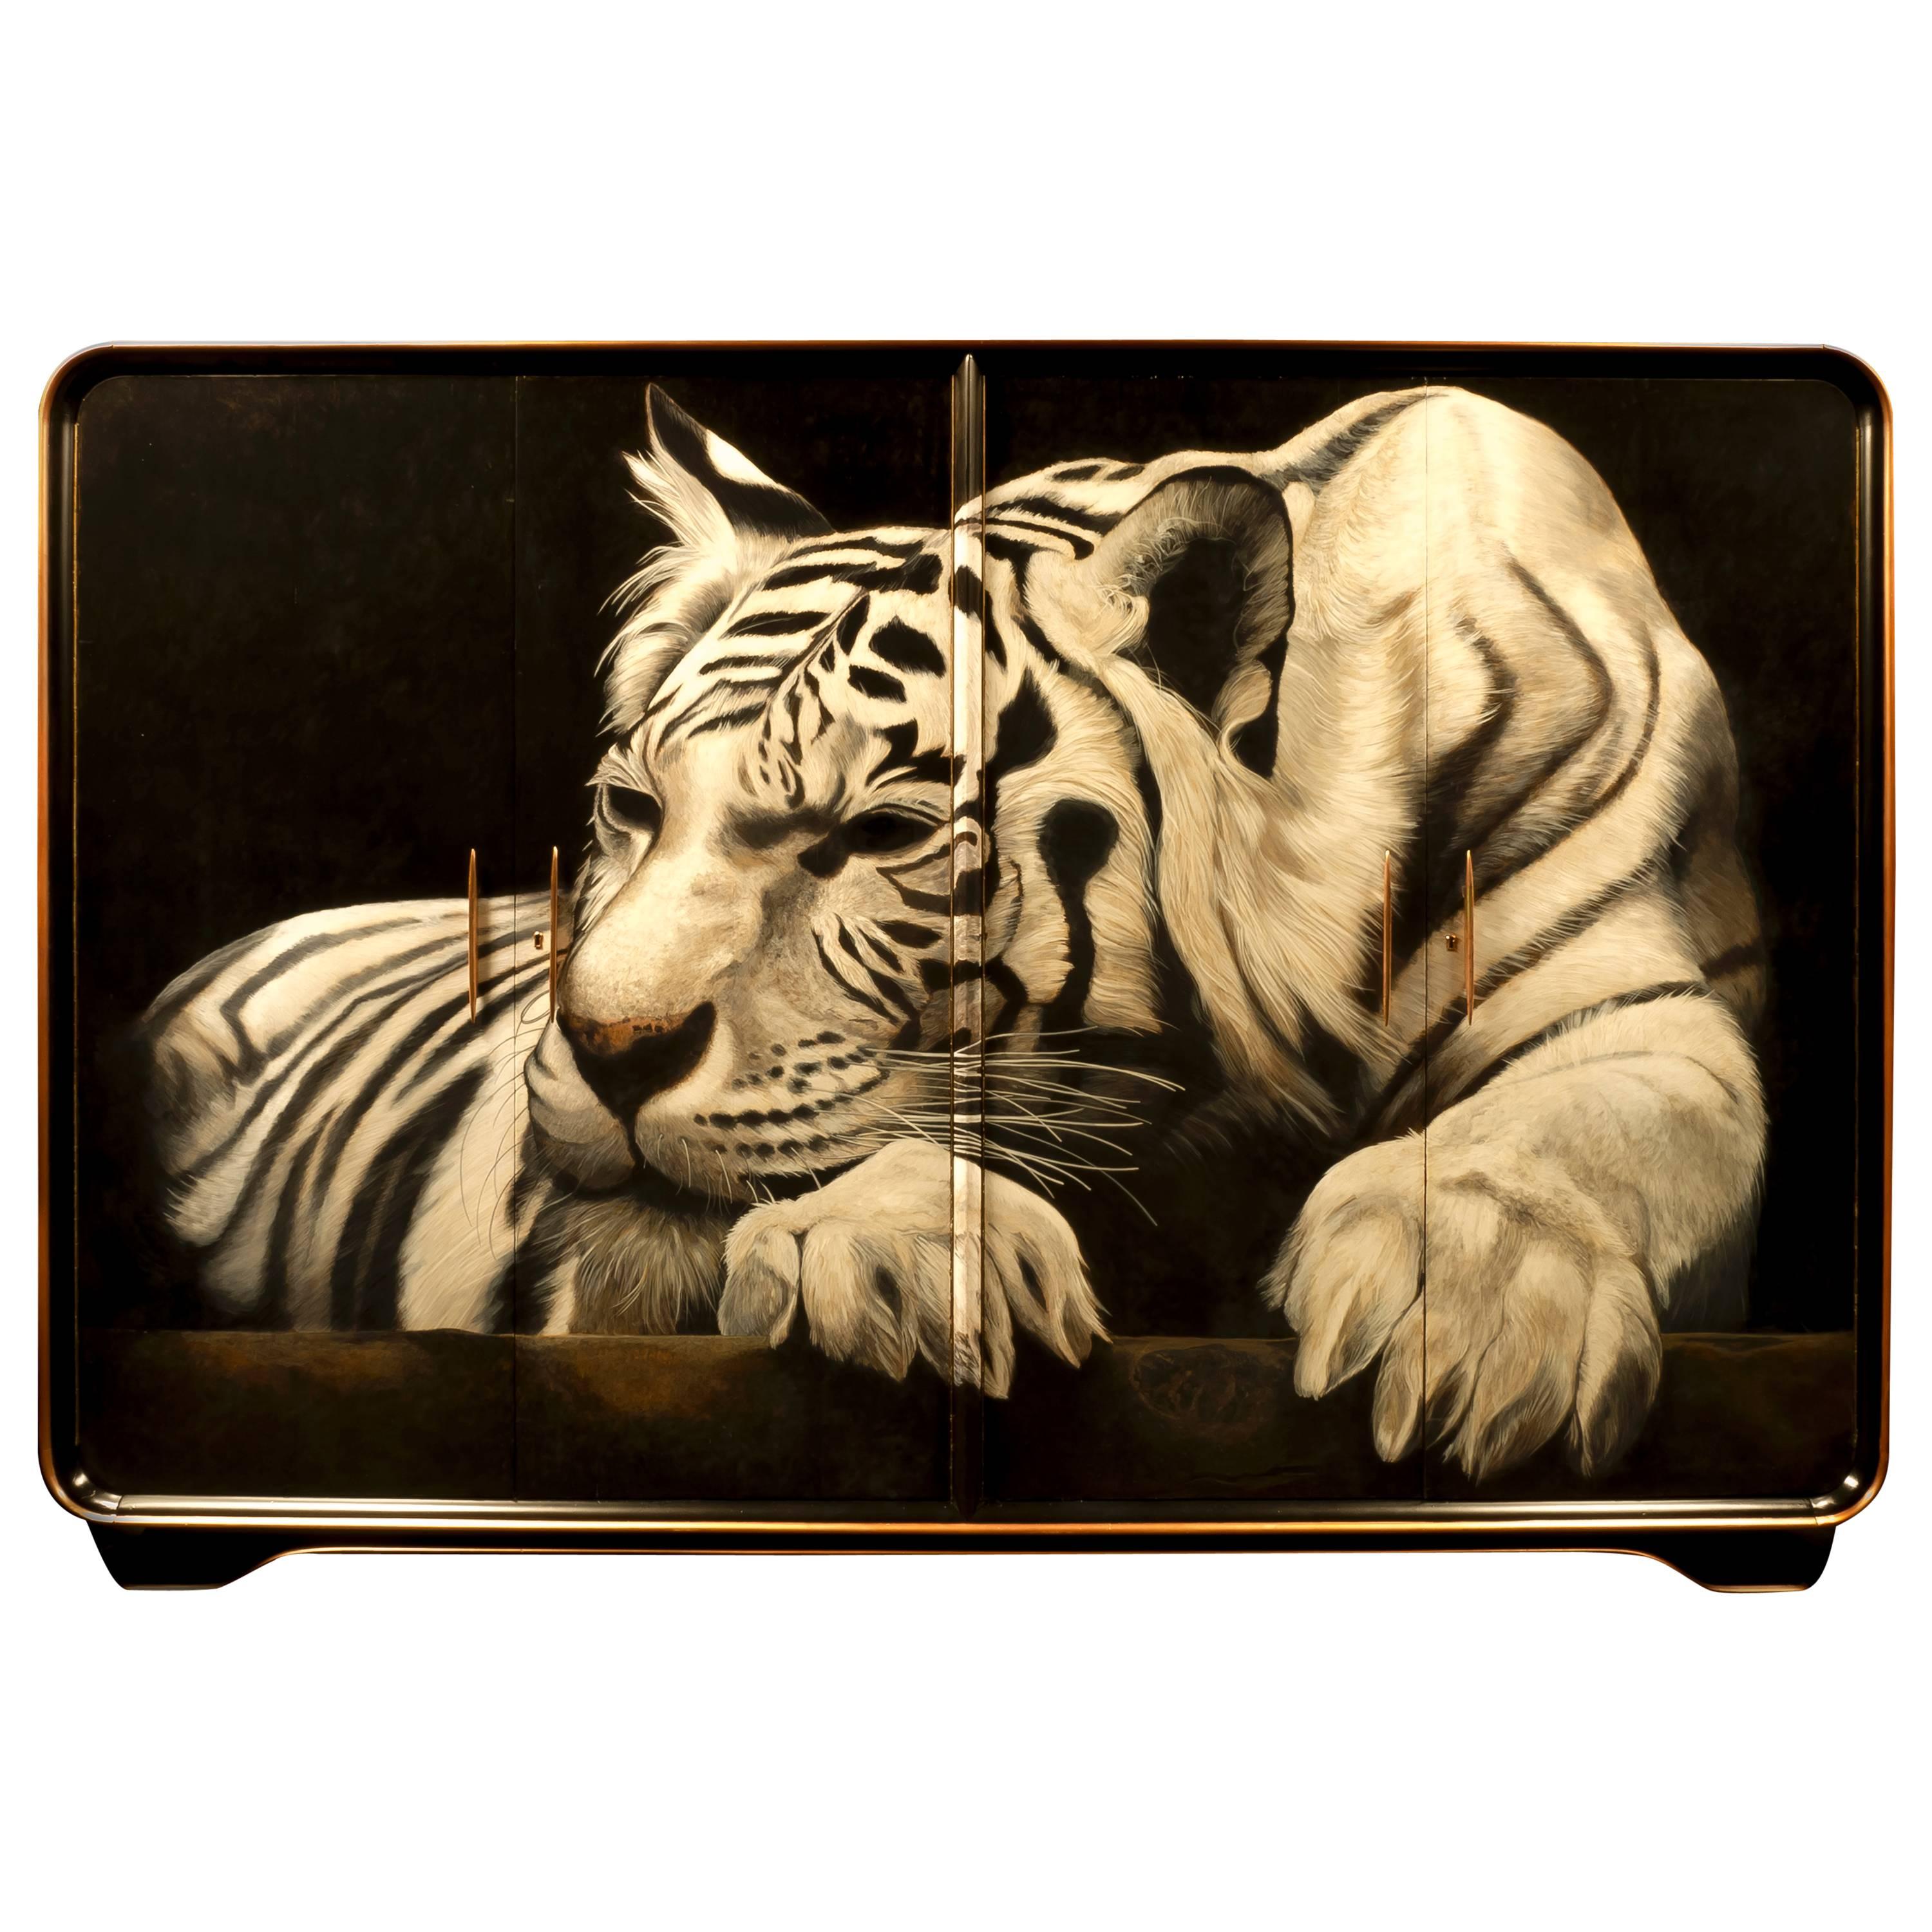 1940s Gentleman's Wardrobe with Giant White Tiger Hand-Painted by Kensa Designs For Sale